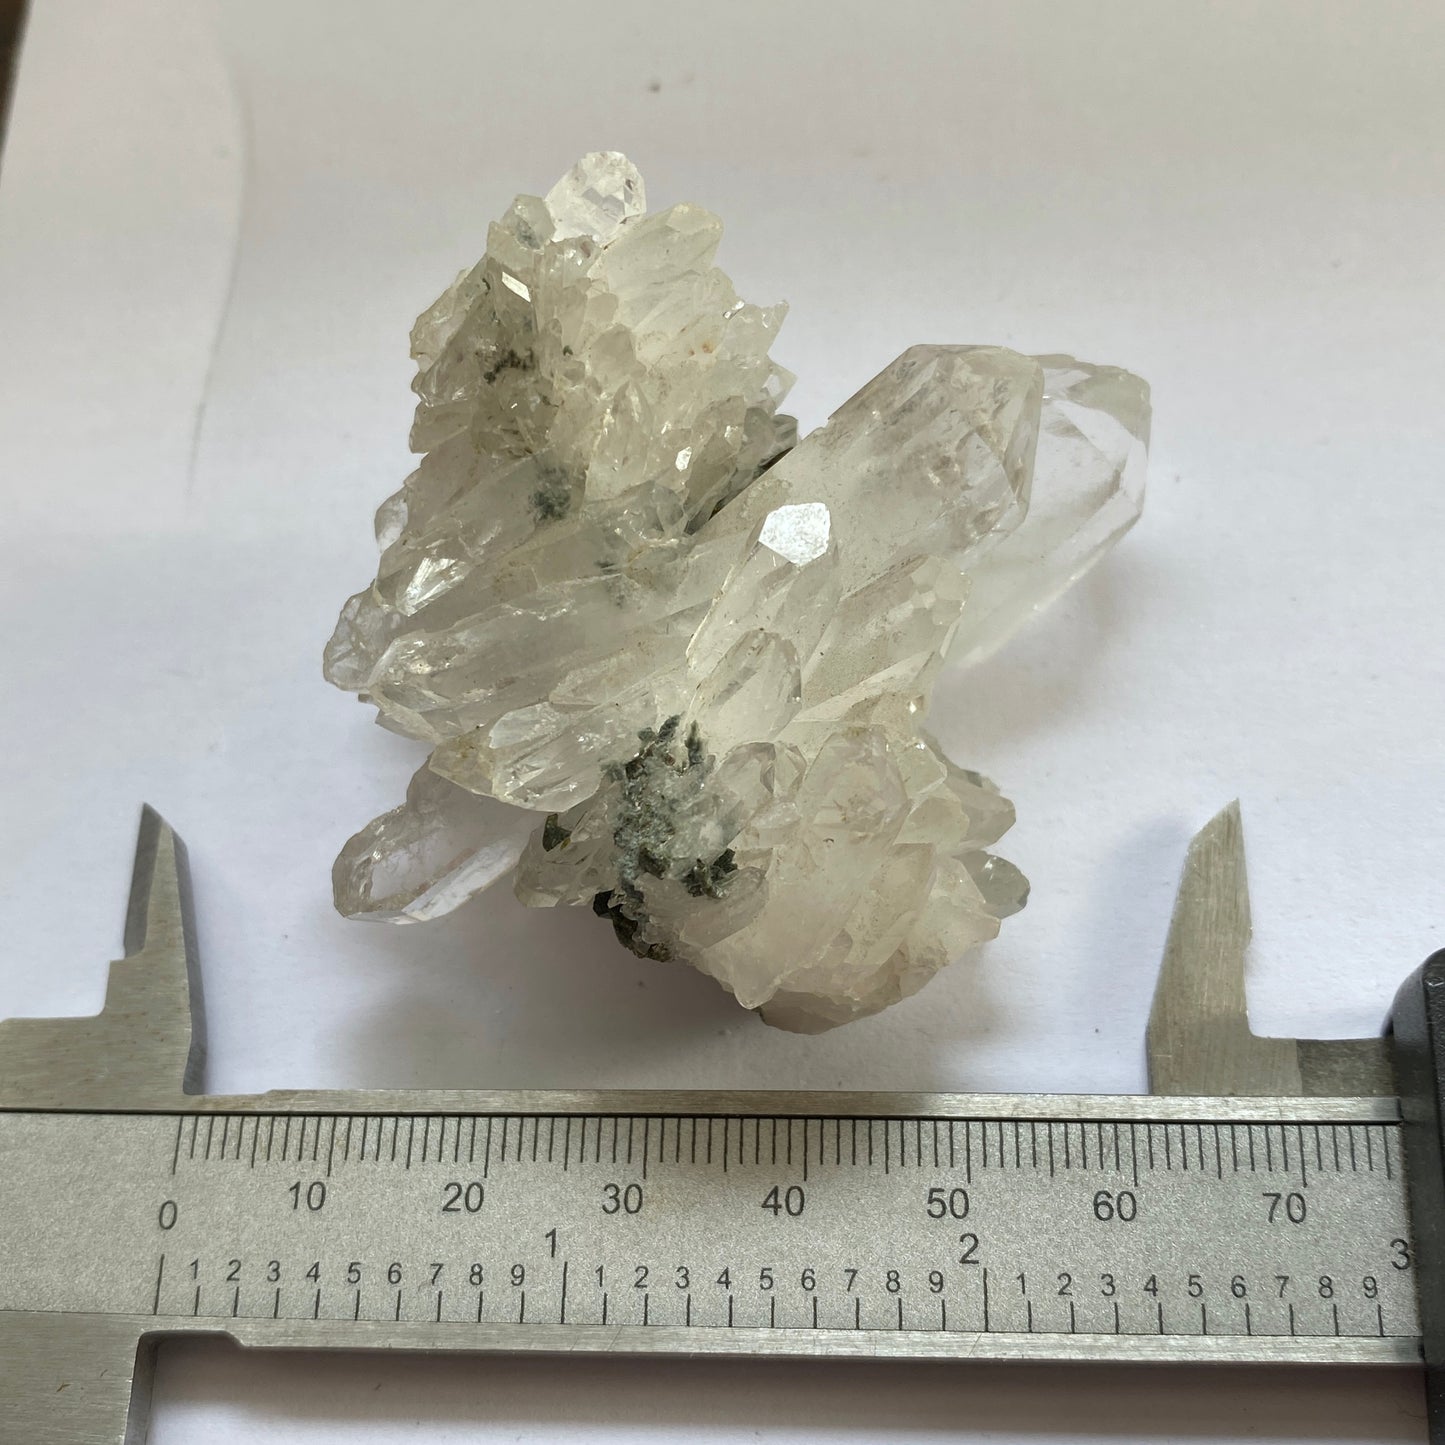 QUARTZ CRYSTAL ASSEMBLAGE WITH EPIDOTE FROM YANGLUIPING CHINA 74g MF1397